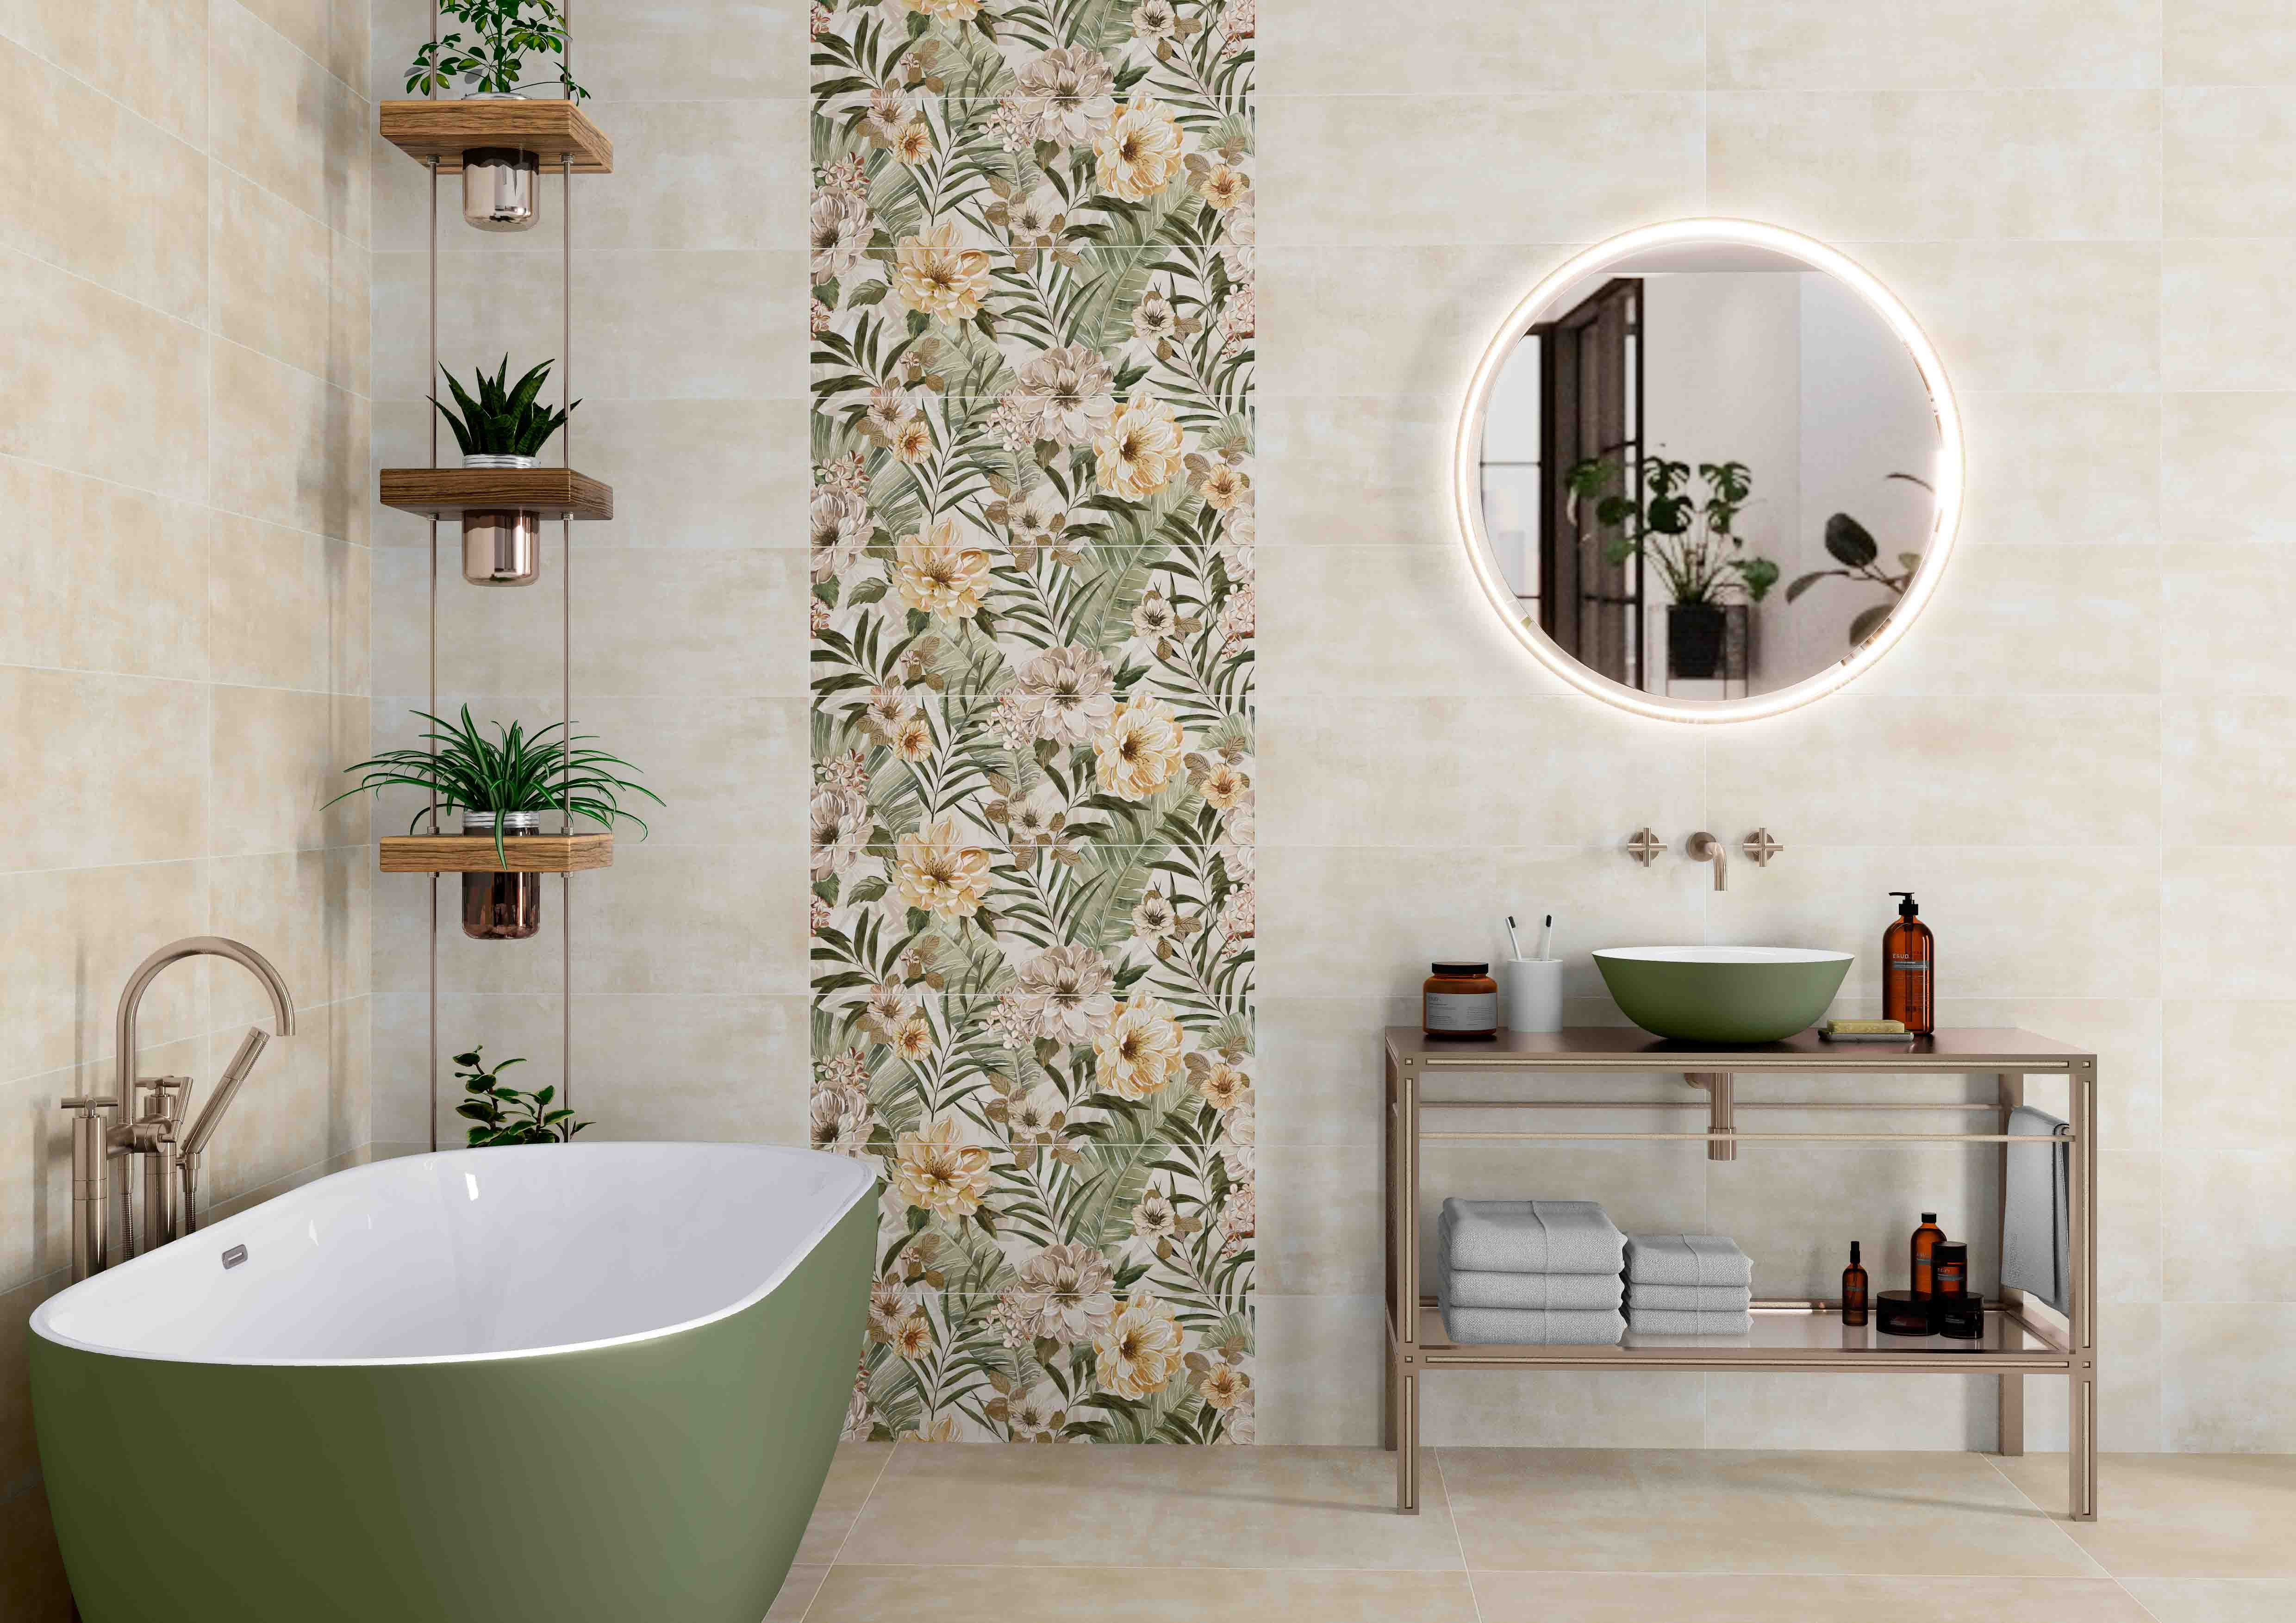 Bloom Ivory decor, MorePlus series by Paul Ceramiche
